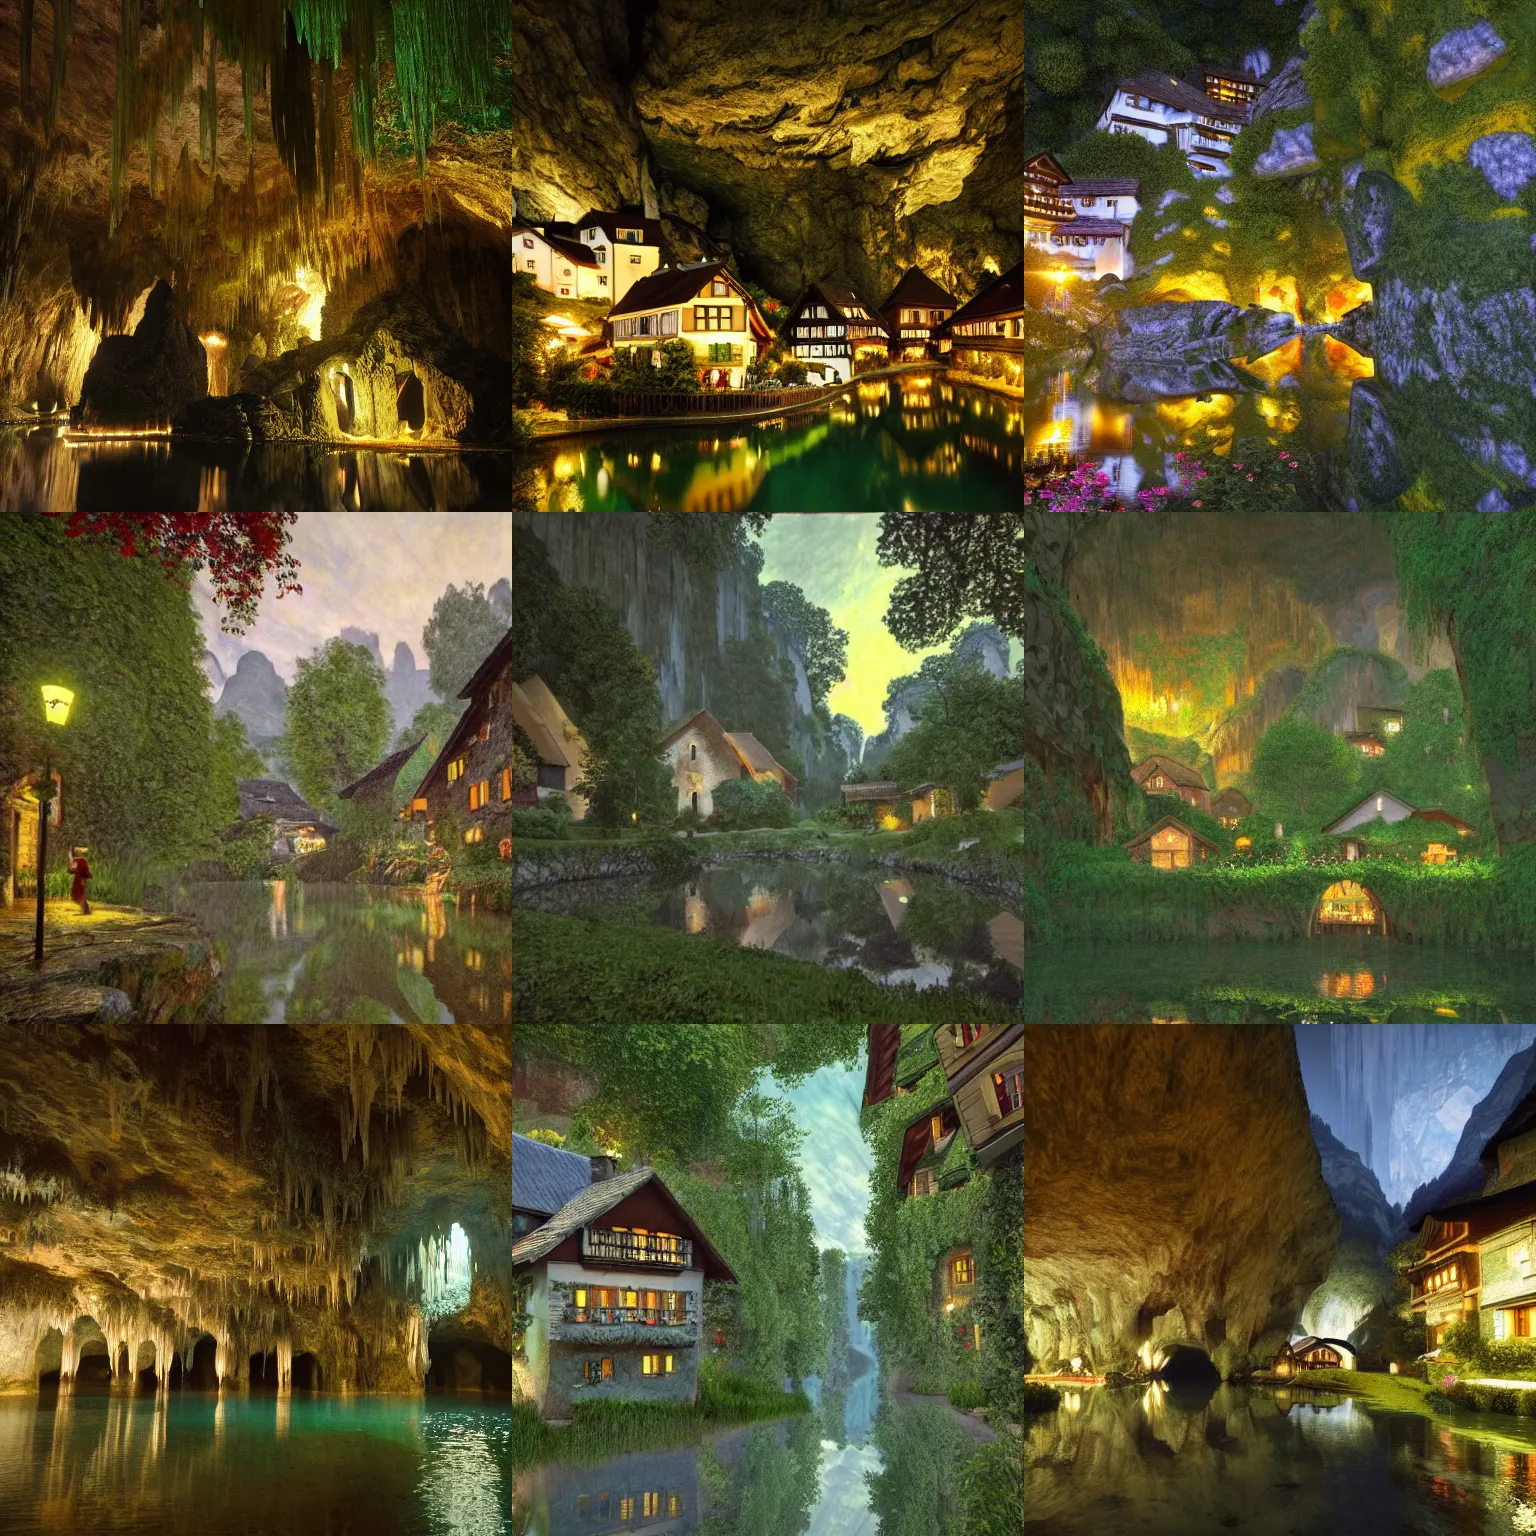 Prompt: a quaint swiss village at night with cottages, a river with sawmills, glowing lights and green park land, all inside an enormous cavern, cavern ceiling visible with large stalactites, unreal engine, by claude monet